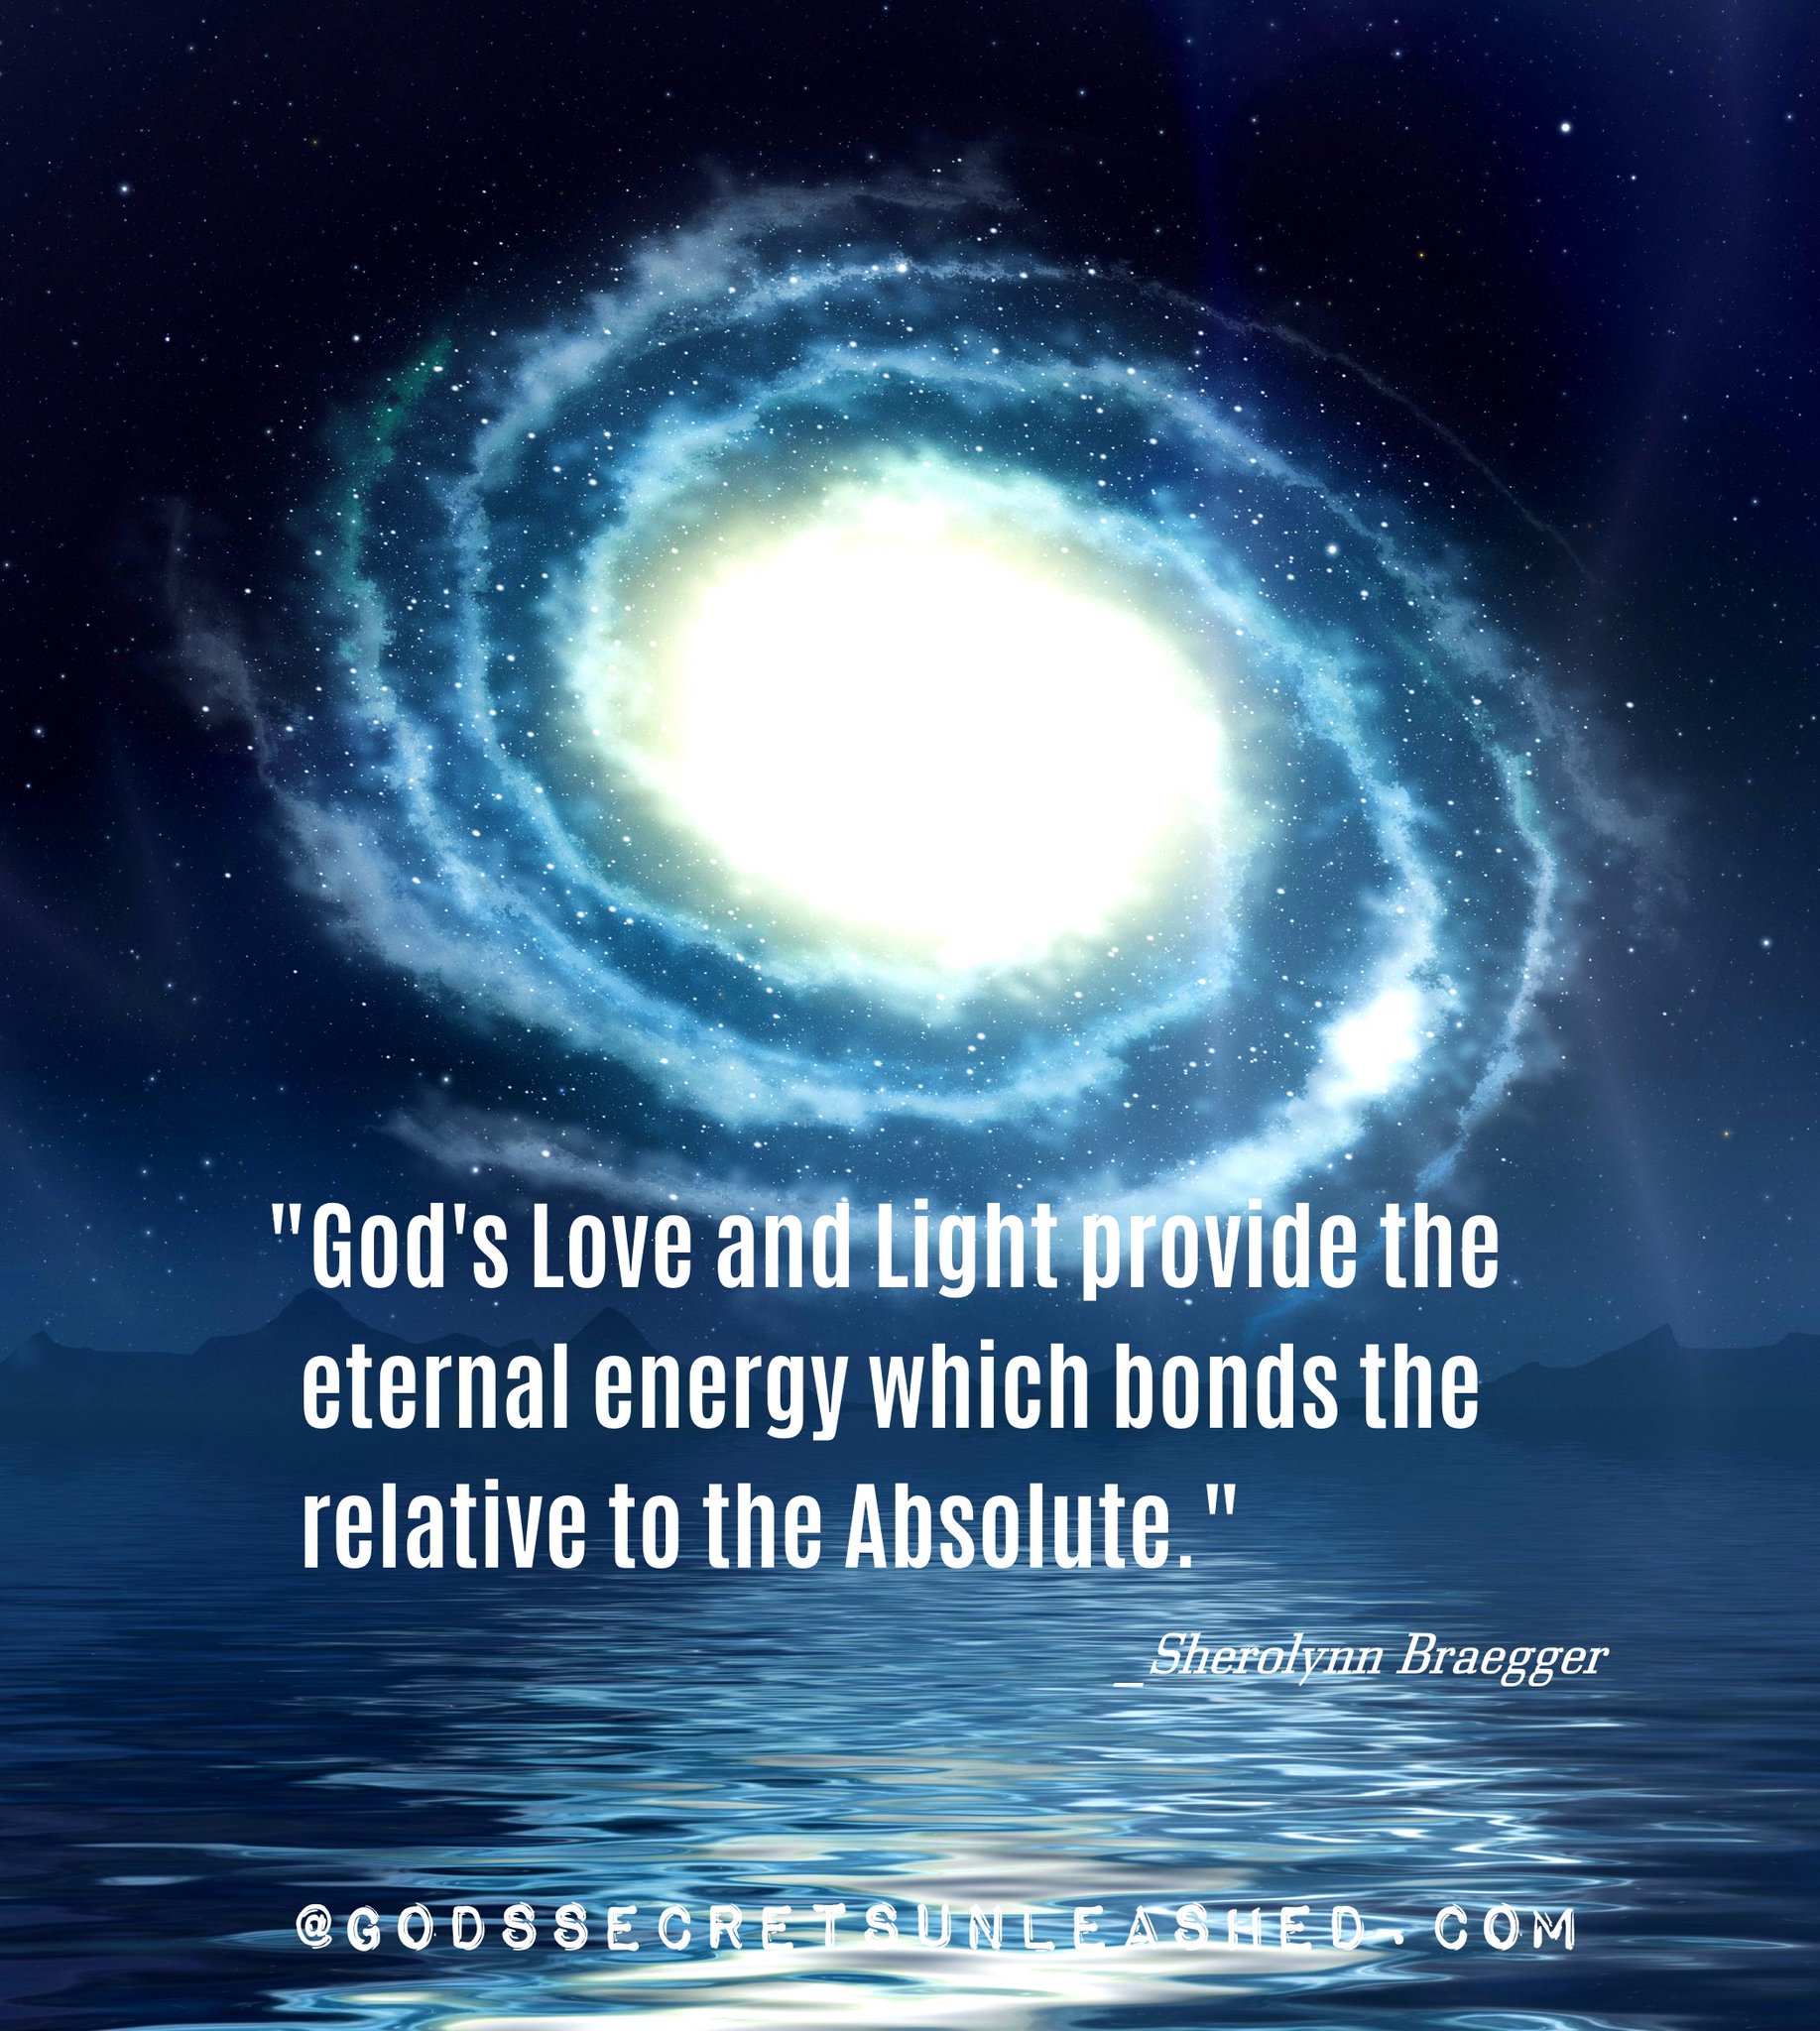 sherolynn braegger on X: The entire fabric of the universe serves but one  purposethe realization of God. _Meher Baba #divine #universal #energy  #fabric #God #Source #realization #oneness #quantum #unified #field #love  #light #